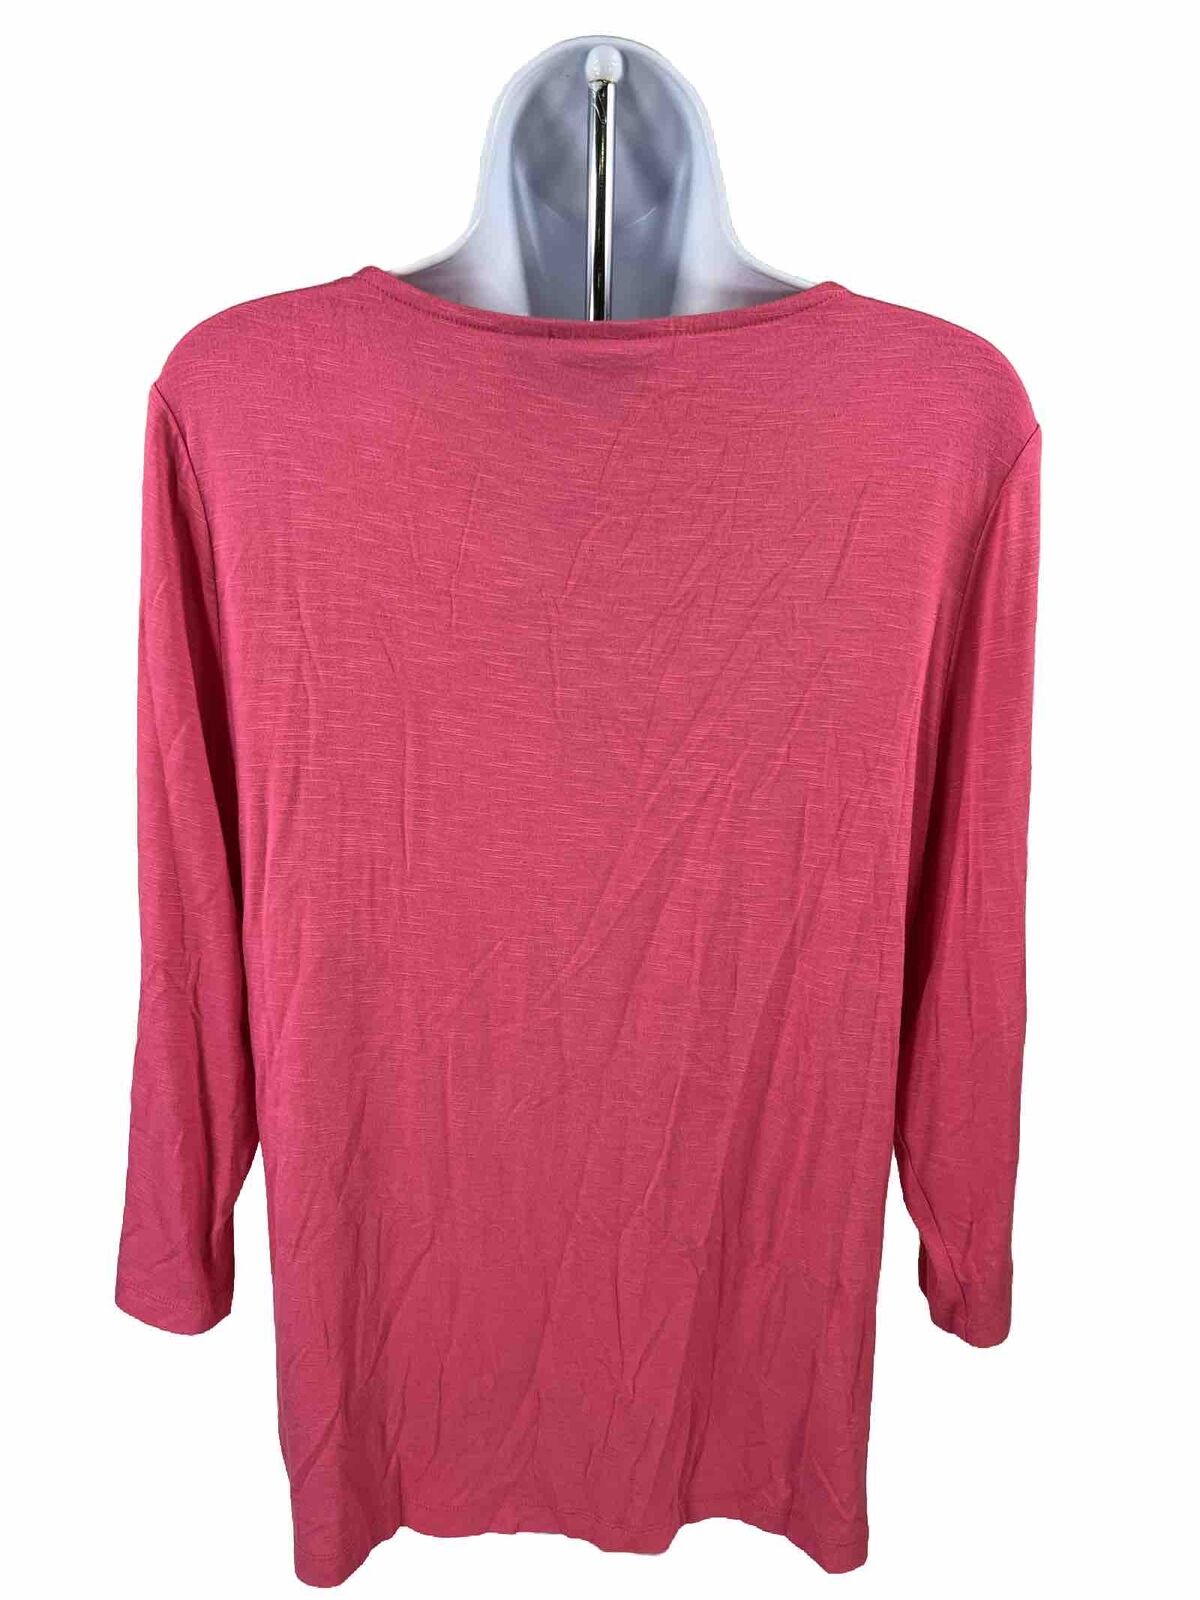 Chicos Easywear Women's Pink 3/4 Sleeve V-Neck T-Shirt - 1/M